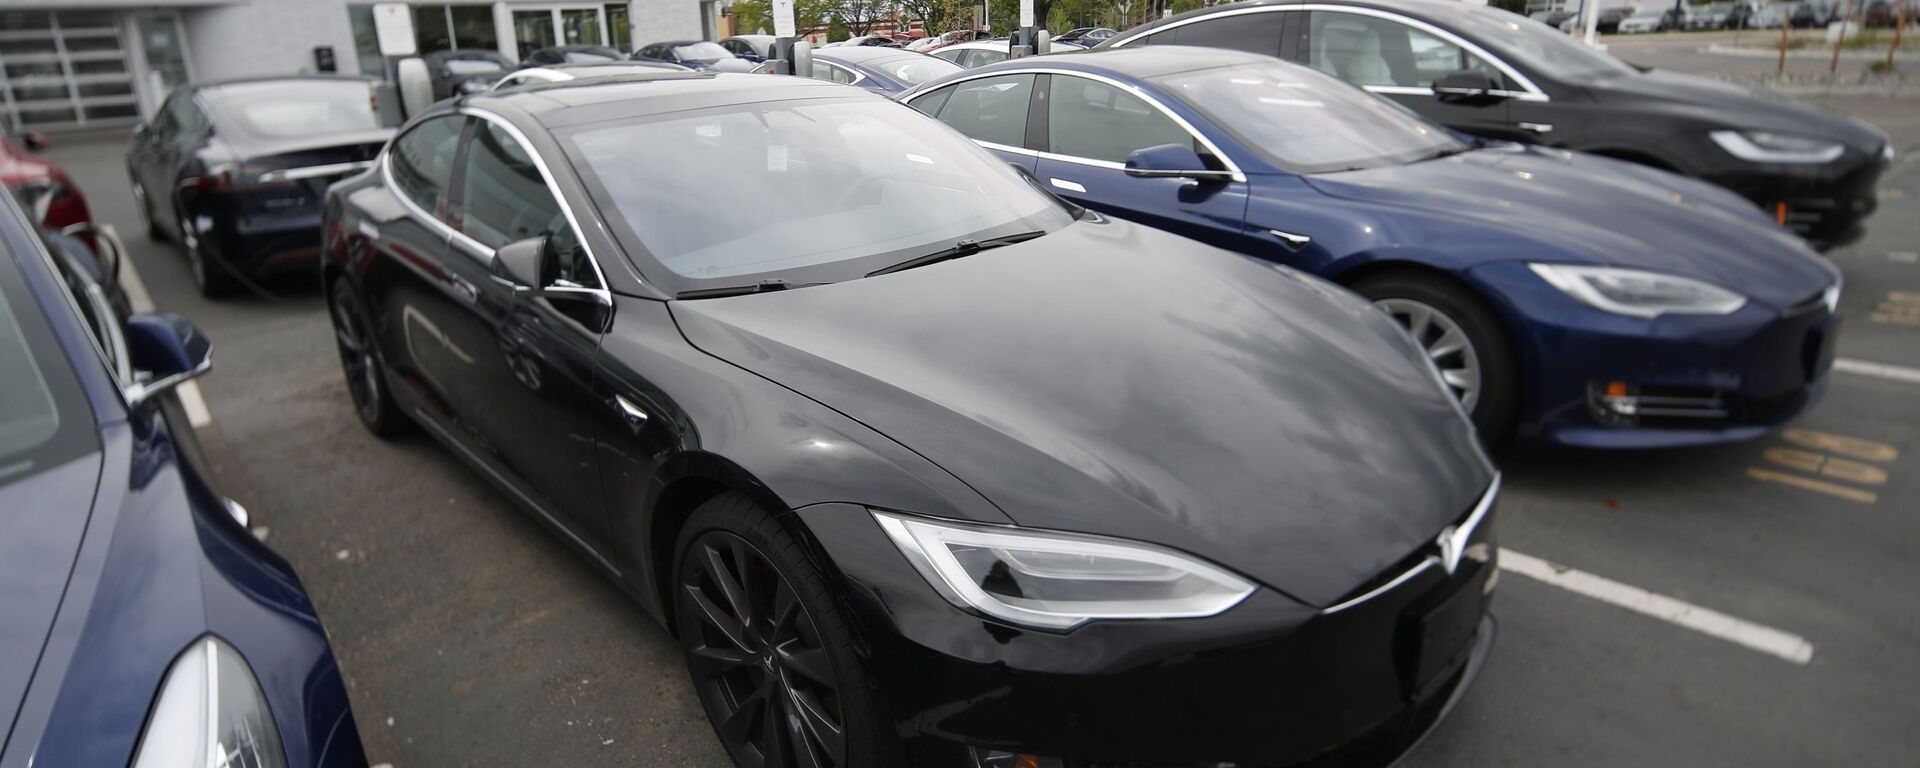 -In this Sunday, May 19, 2019, file photograph, a line of unsold 2019 Model S sedans sits at a Tesla dealership in Littleton, Colo.  - Sputnik International, 1920, 19.07.2022